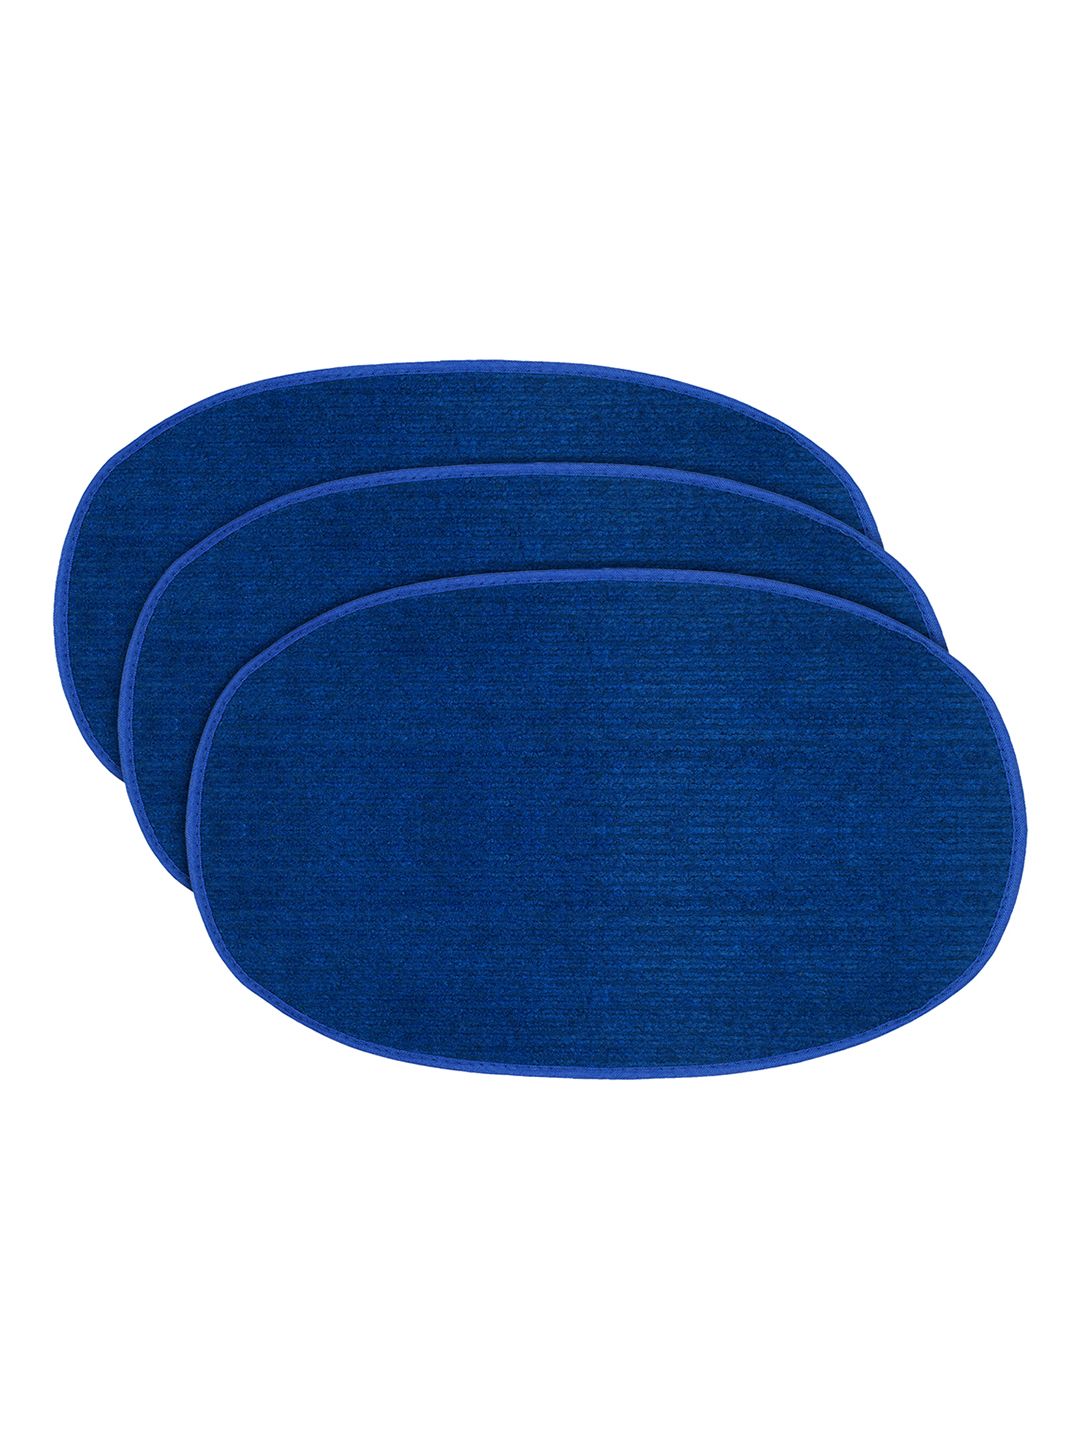 Kuber Industries Set Of 3 Blue Solid Oval Anti-Skid Doormats Price in India